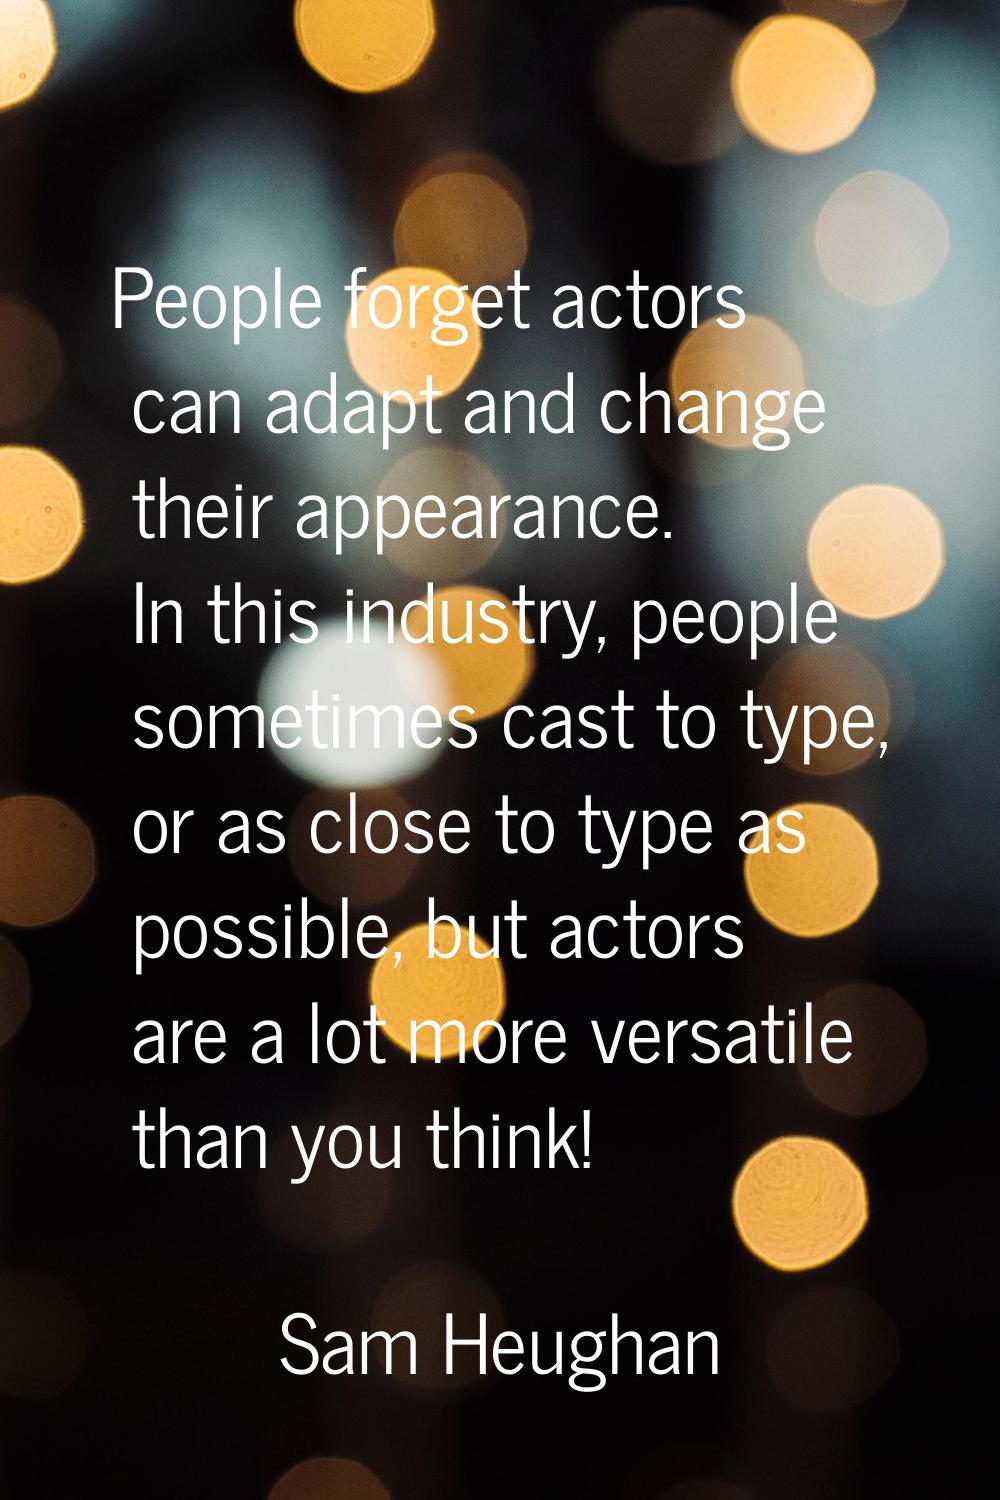 People forget actors can adapt and change their appearance. In this industry, people sometimes cast